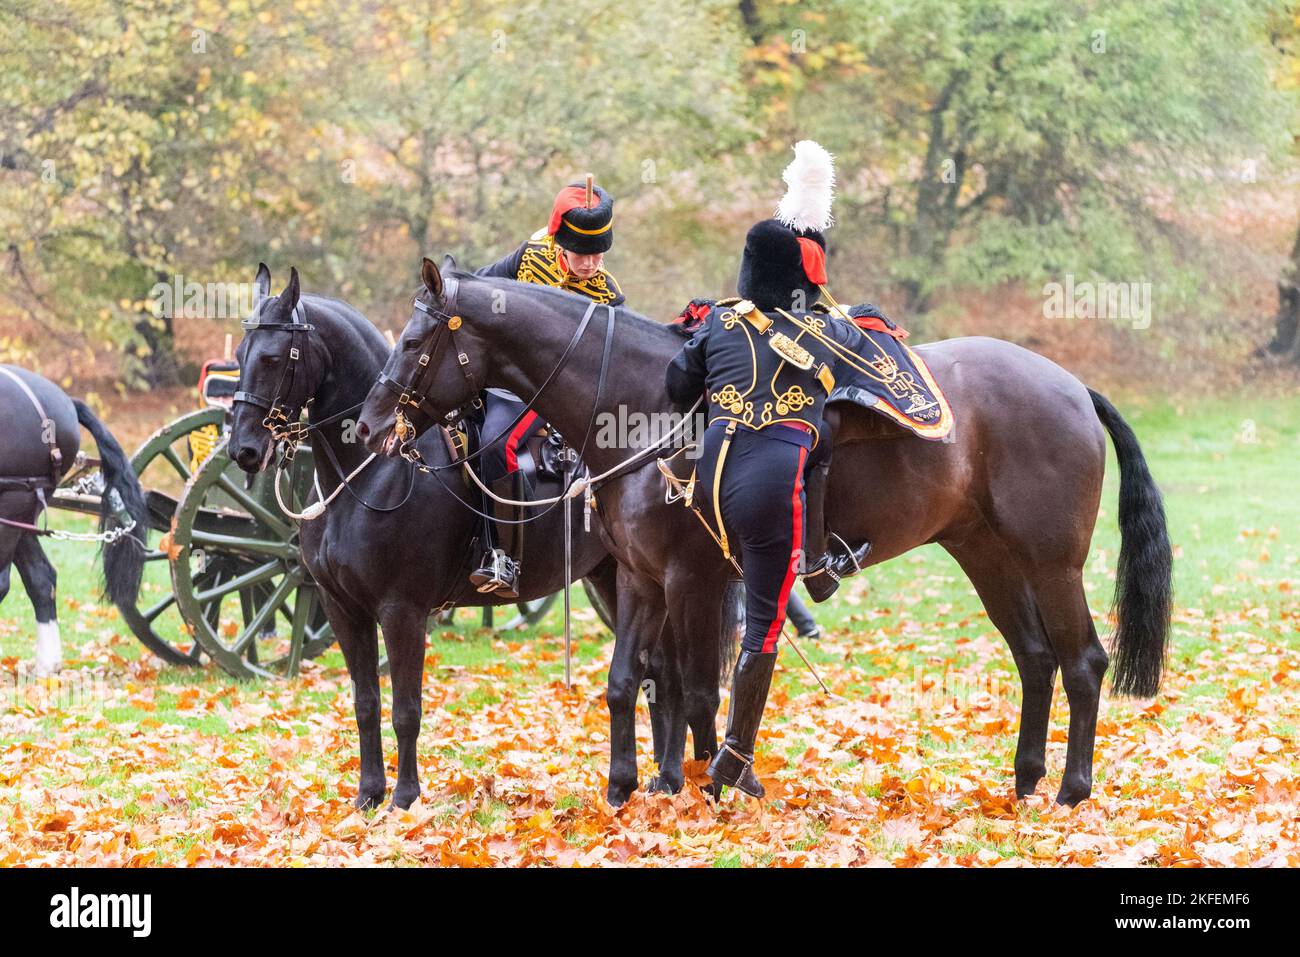 Kings Troop, Royal Horse Artillery carried out a 41 gun salute for the King Charles III's birthday in Green Park, London, UK. Rider mounting a horse Stock Photo